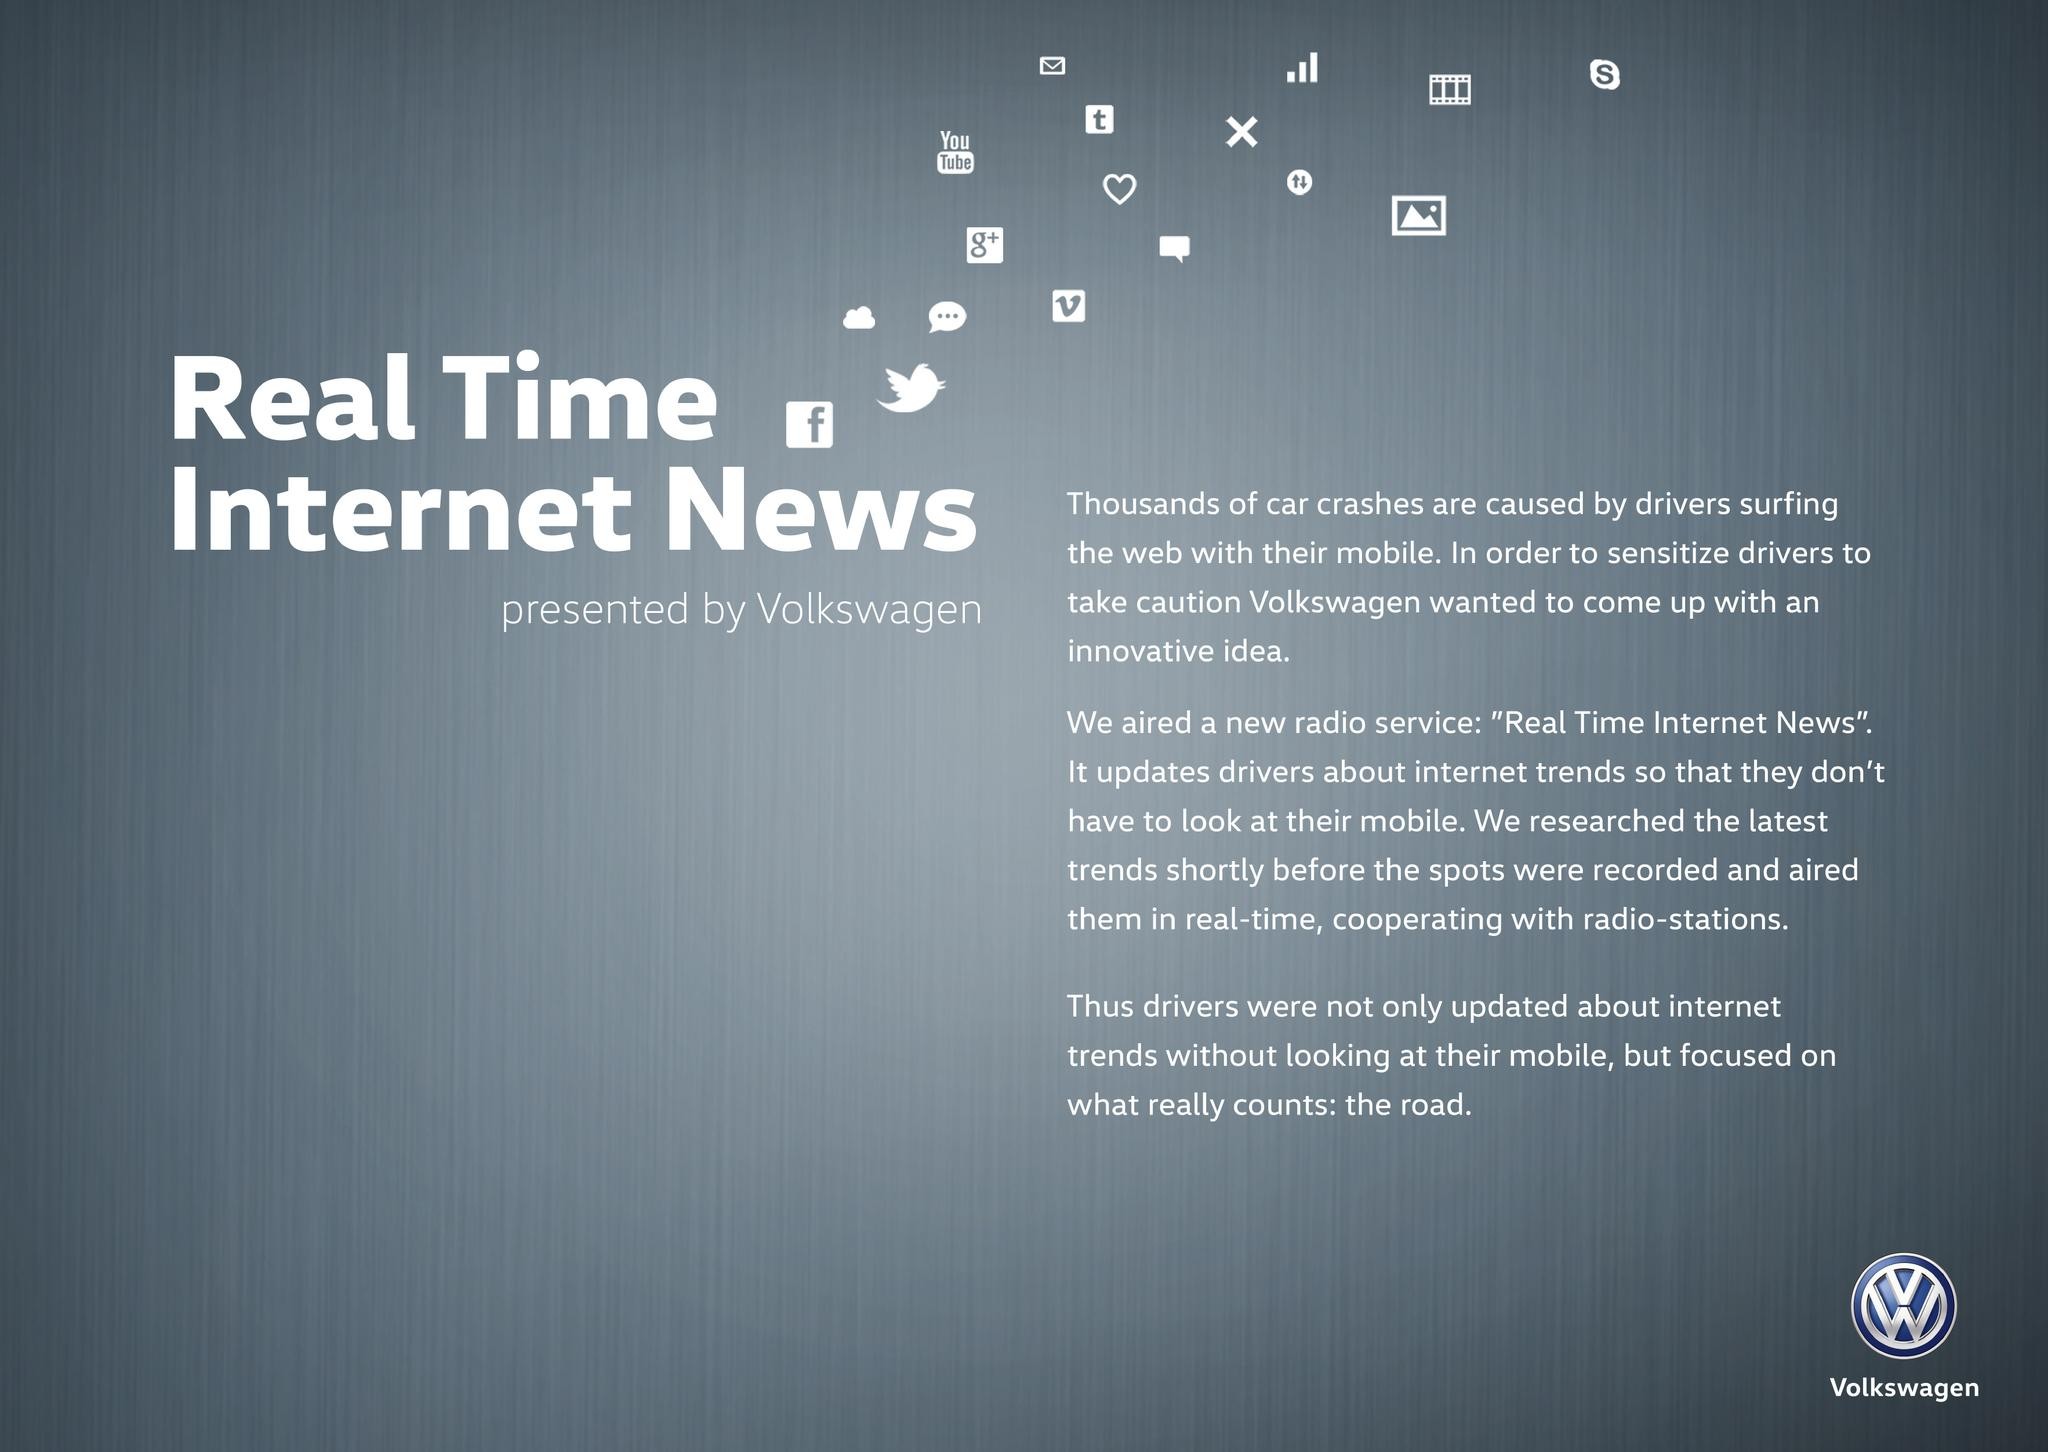 Real Time Internet News